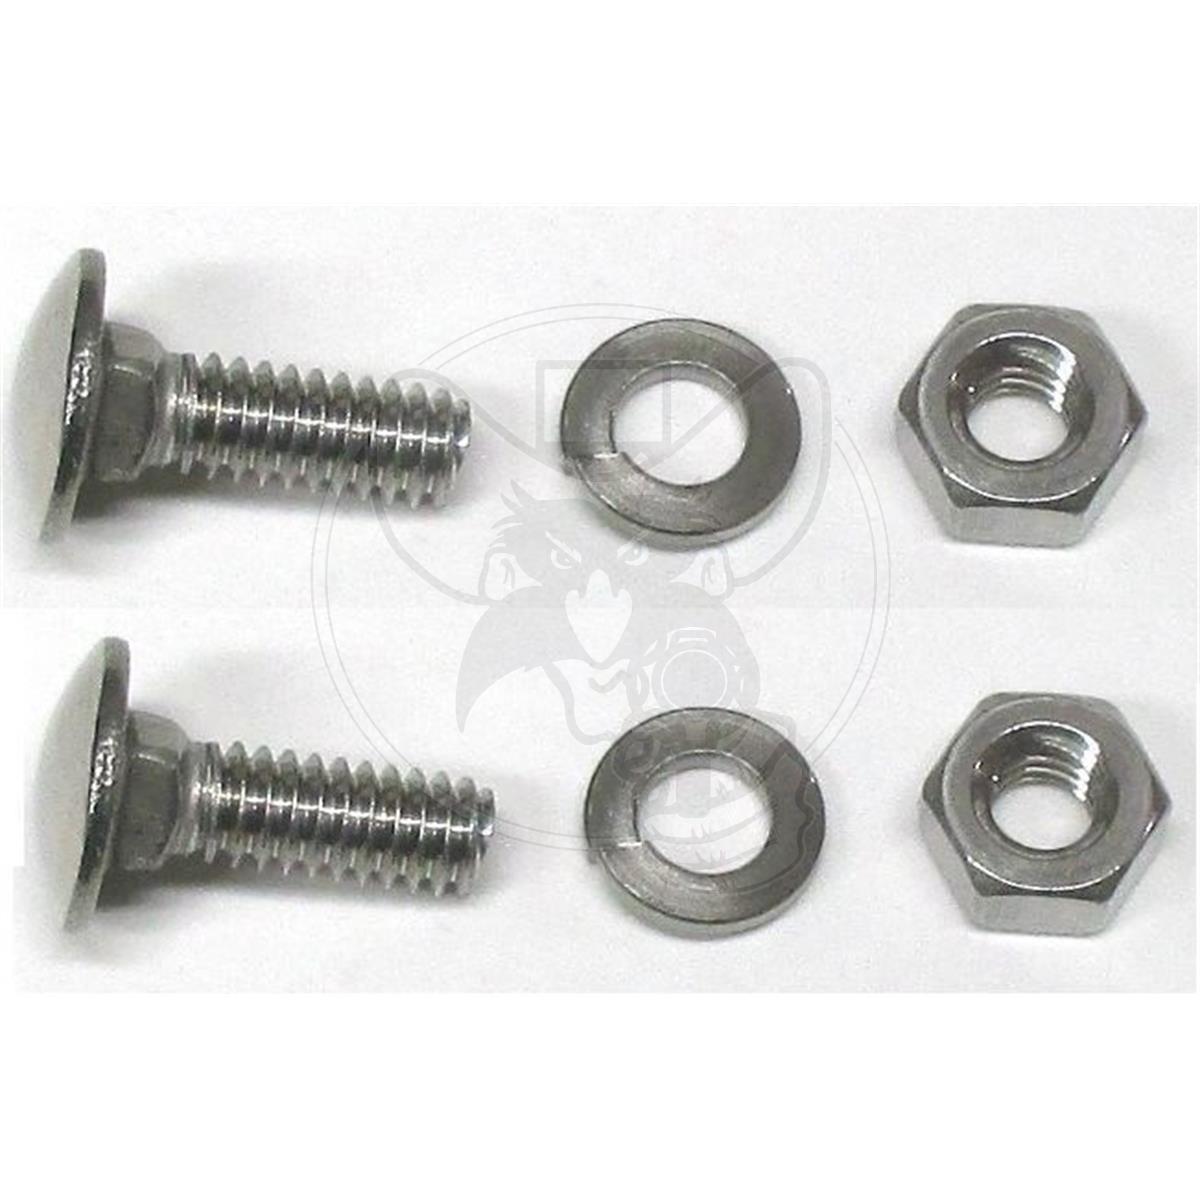 VINTIQUE FRONT GUARD BRACE BOLT KIT STAINLESS FITS 1928-34 FORD